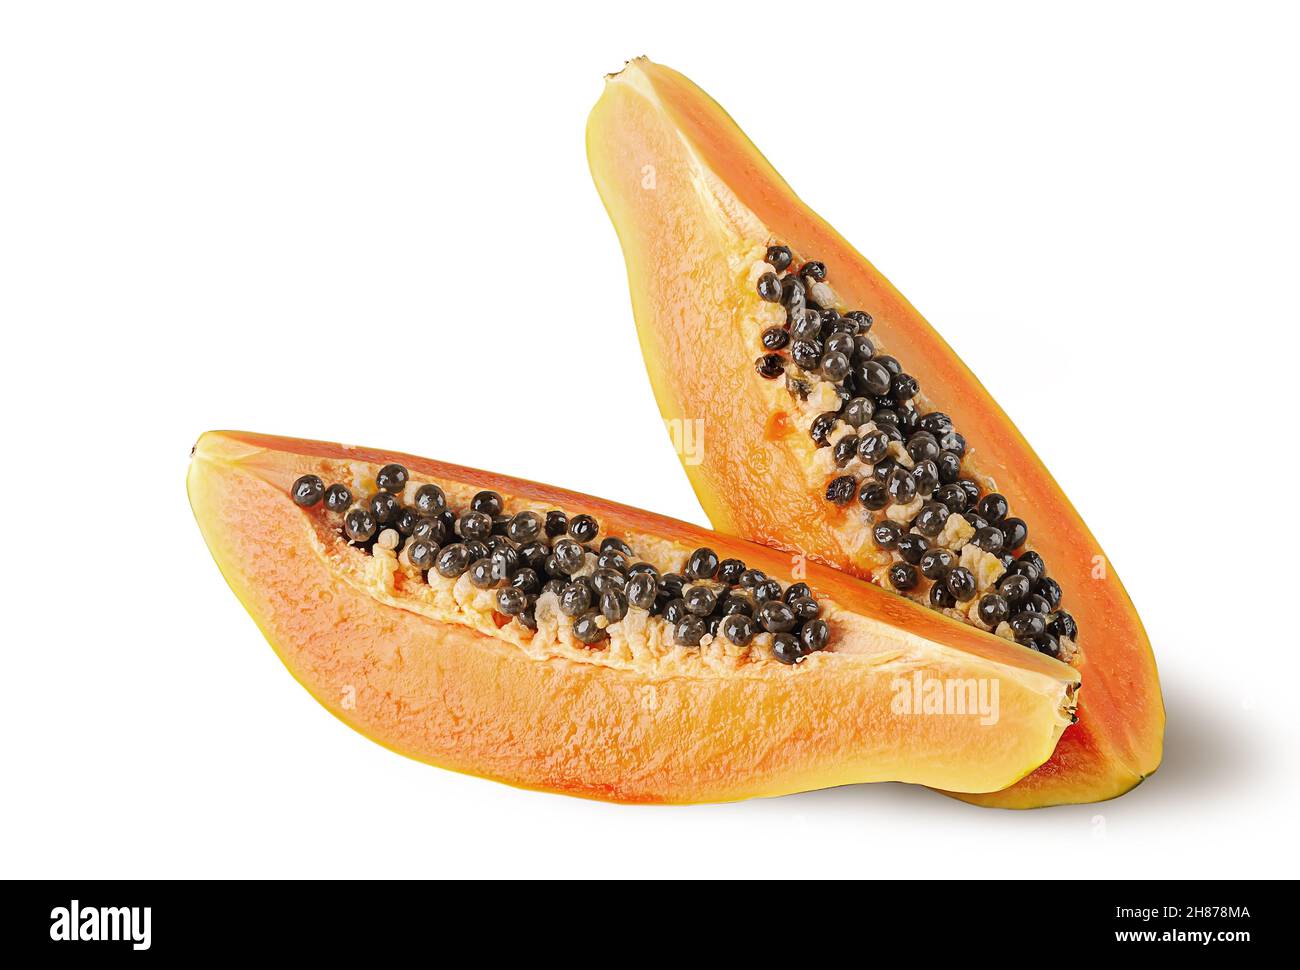 Two quarters of ripe papaya one after another isolated on white background Stock Photo